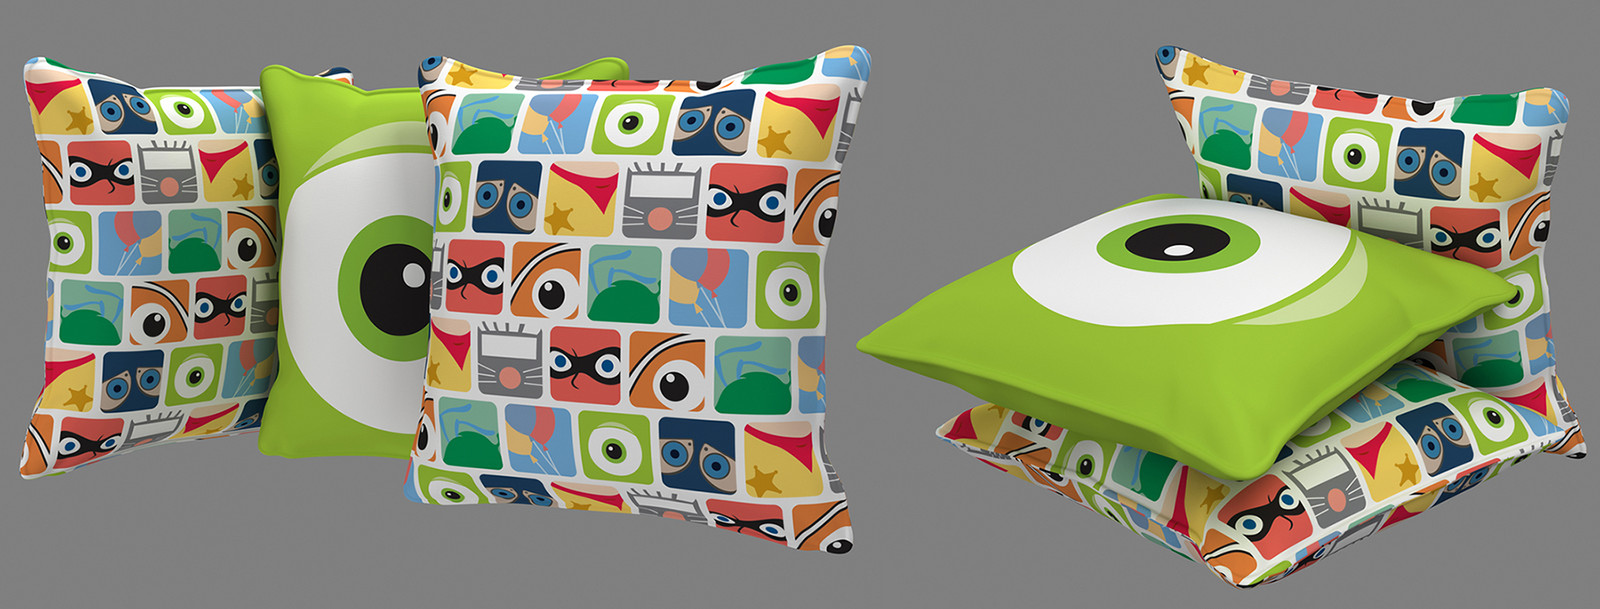 I was sent the Pixar images to do renderings of the images applied to pillows for a book.  